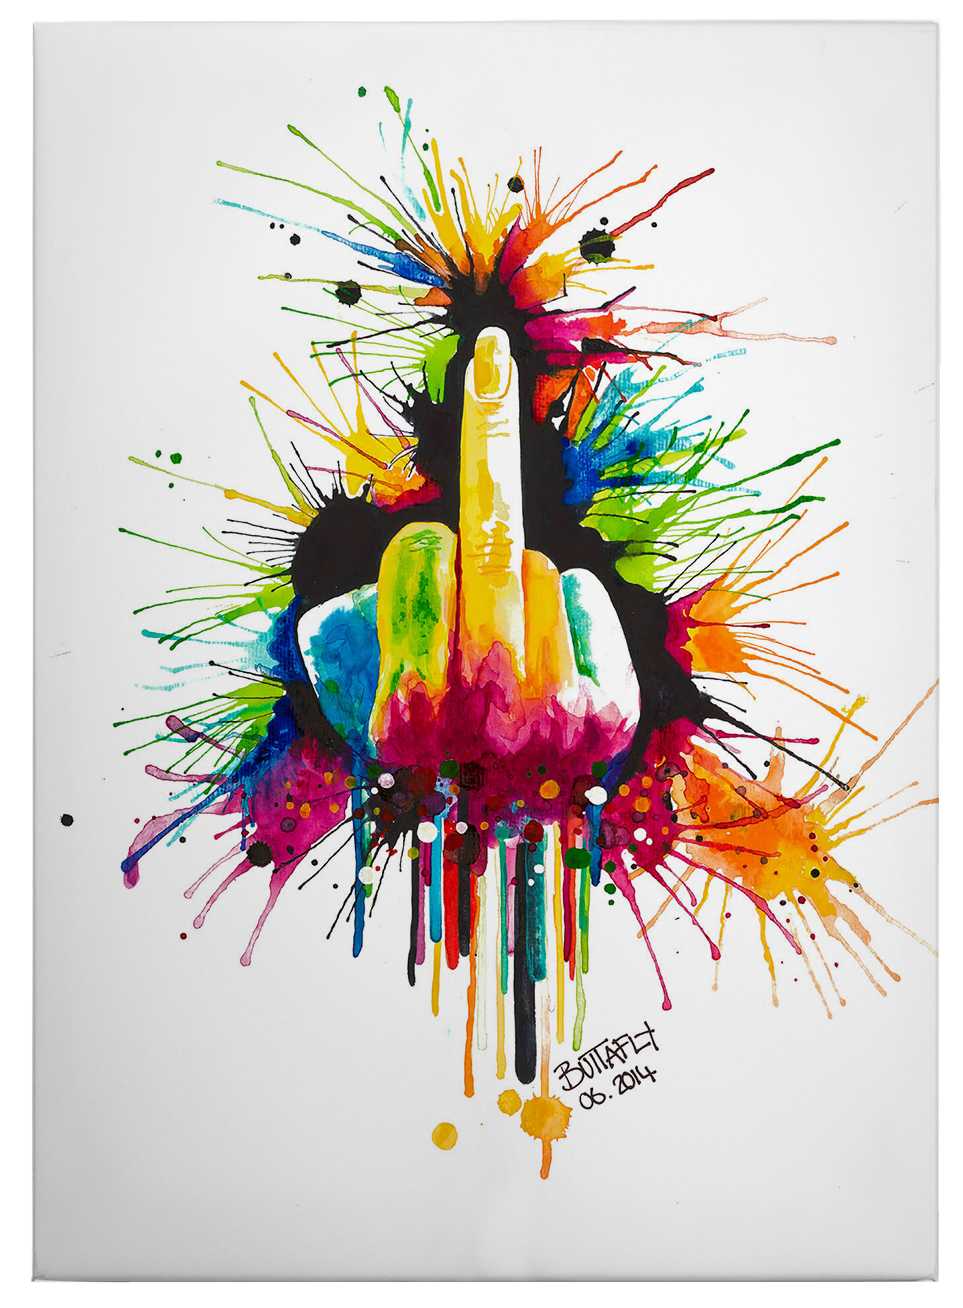             Canvas print middle finger statement by Butterfly
        